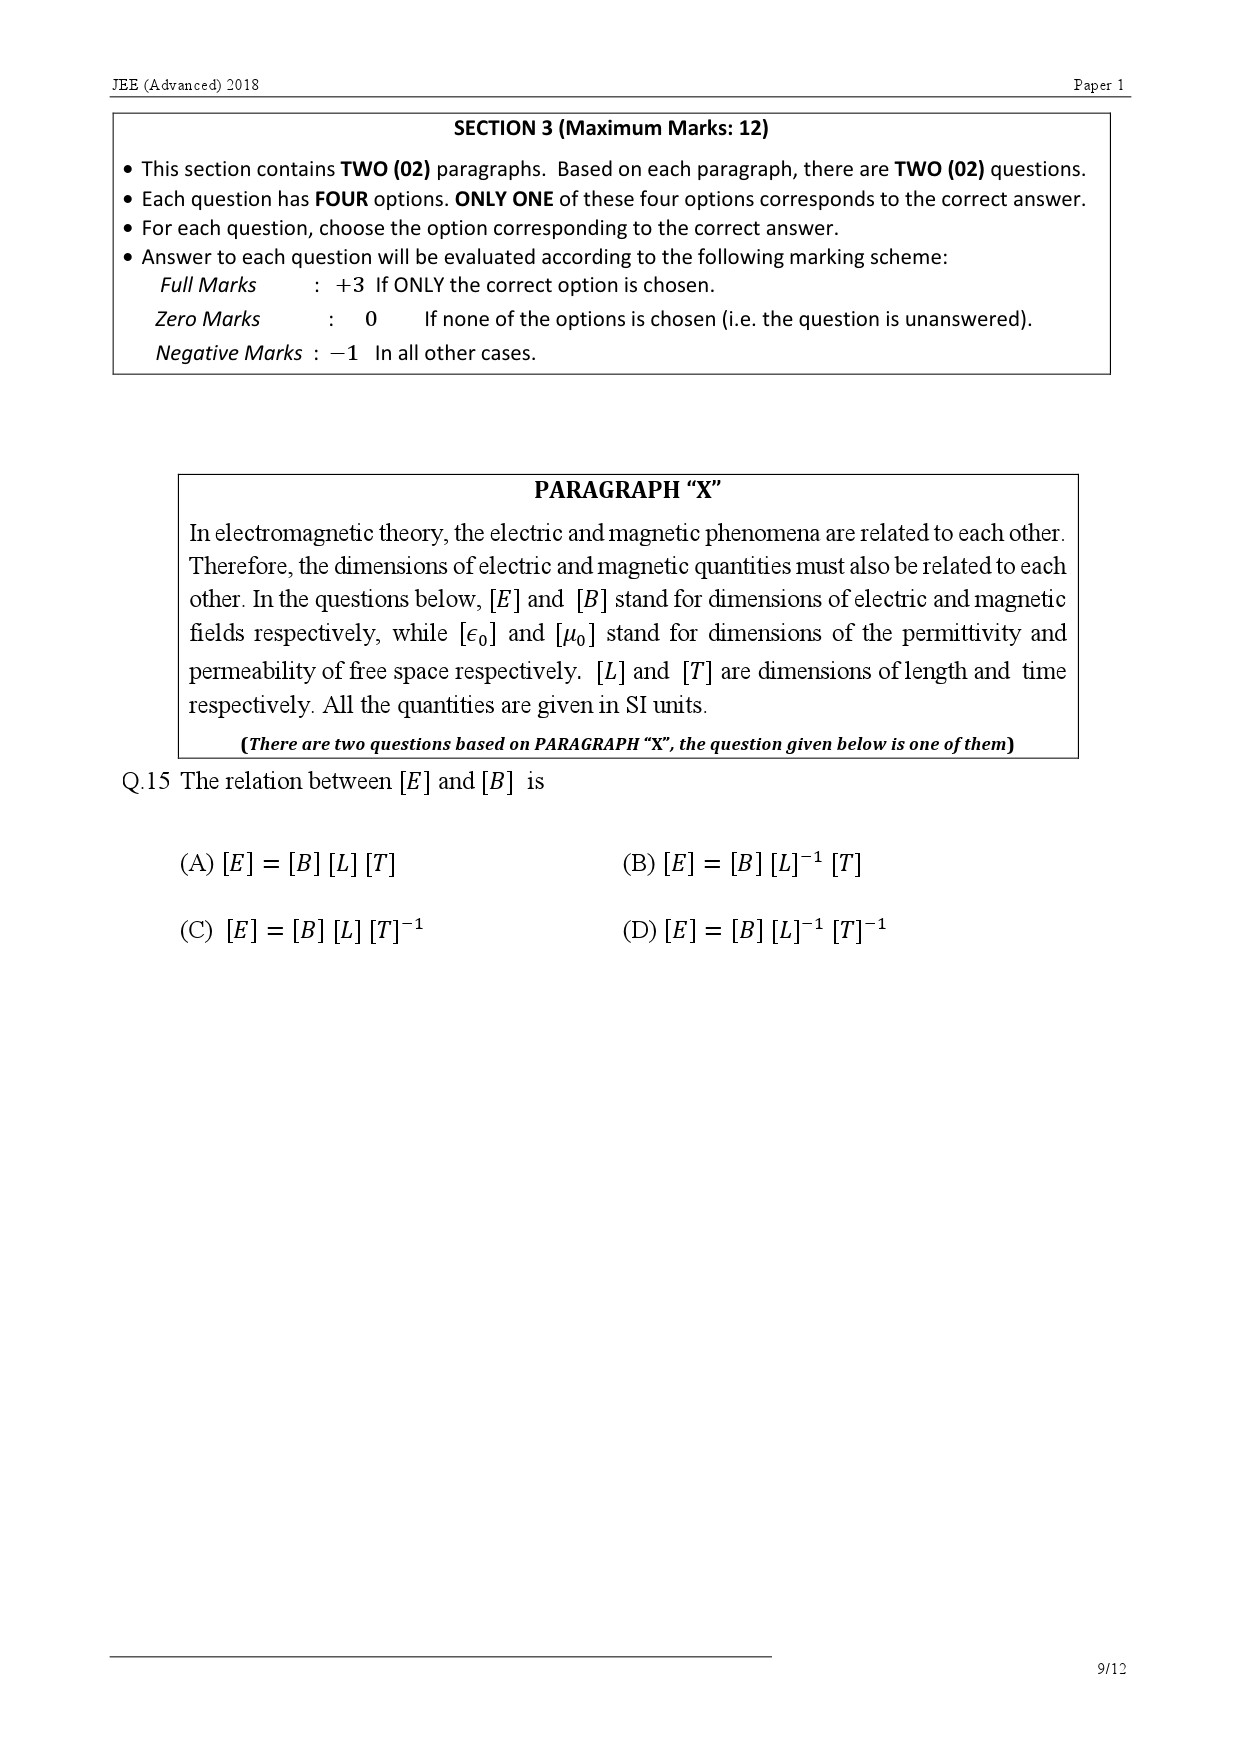 JEE Advanced Exam Question Paper 2018 Paper 1 Physics 9